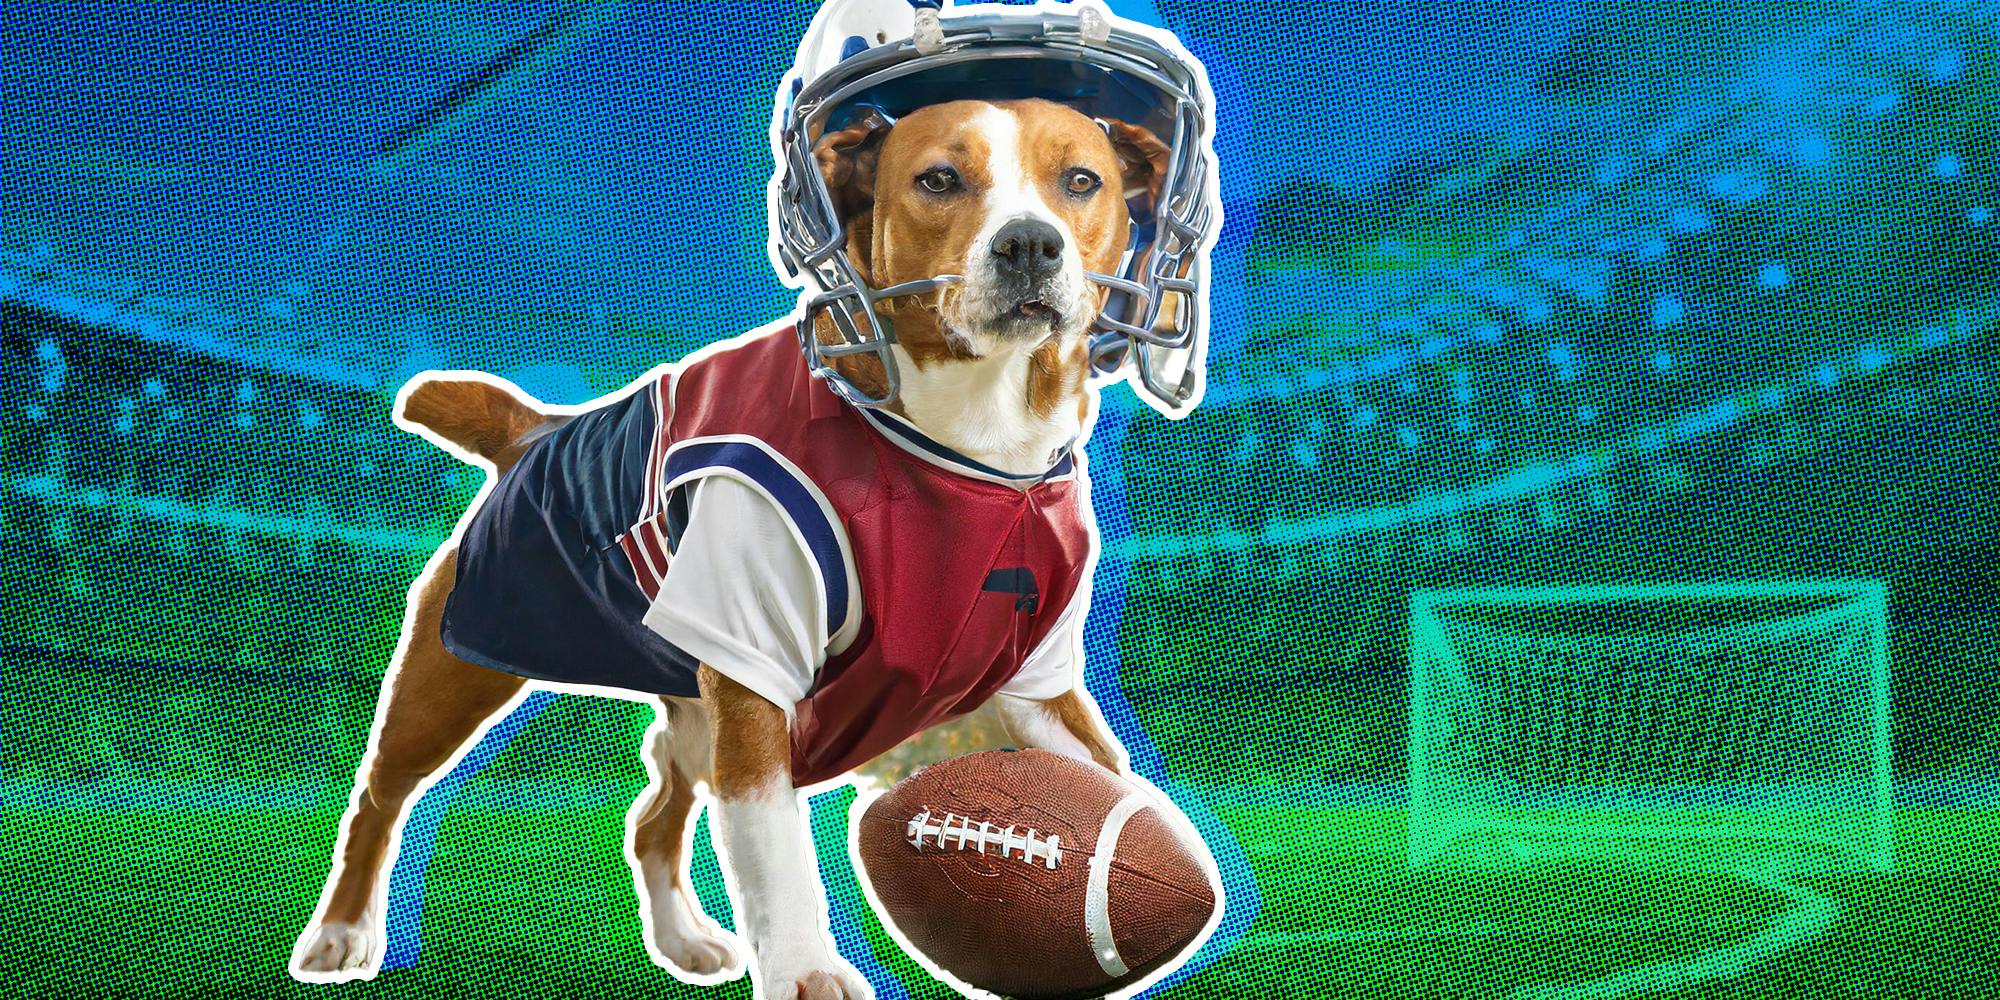 Google’s new AI search tool keeps claiming dogs play professional sports 